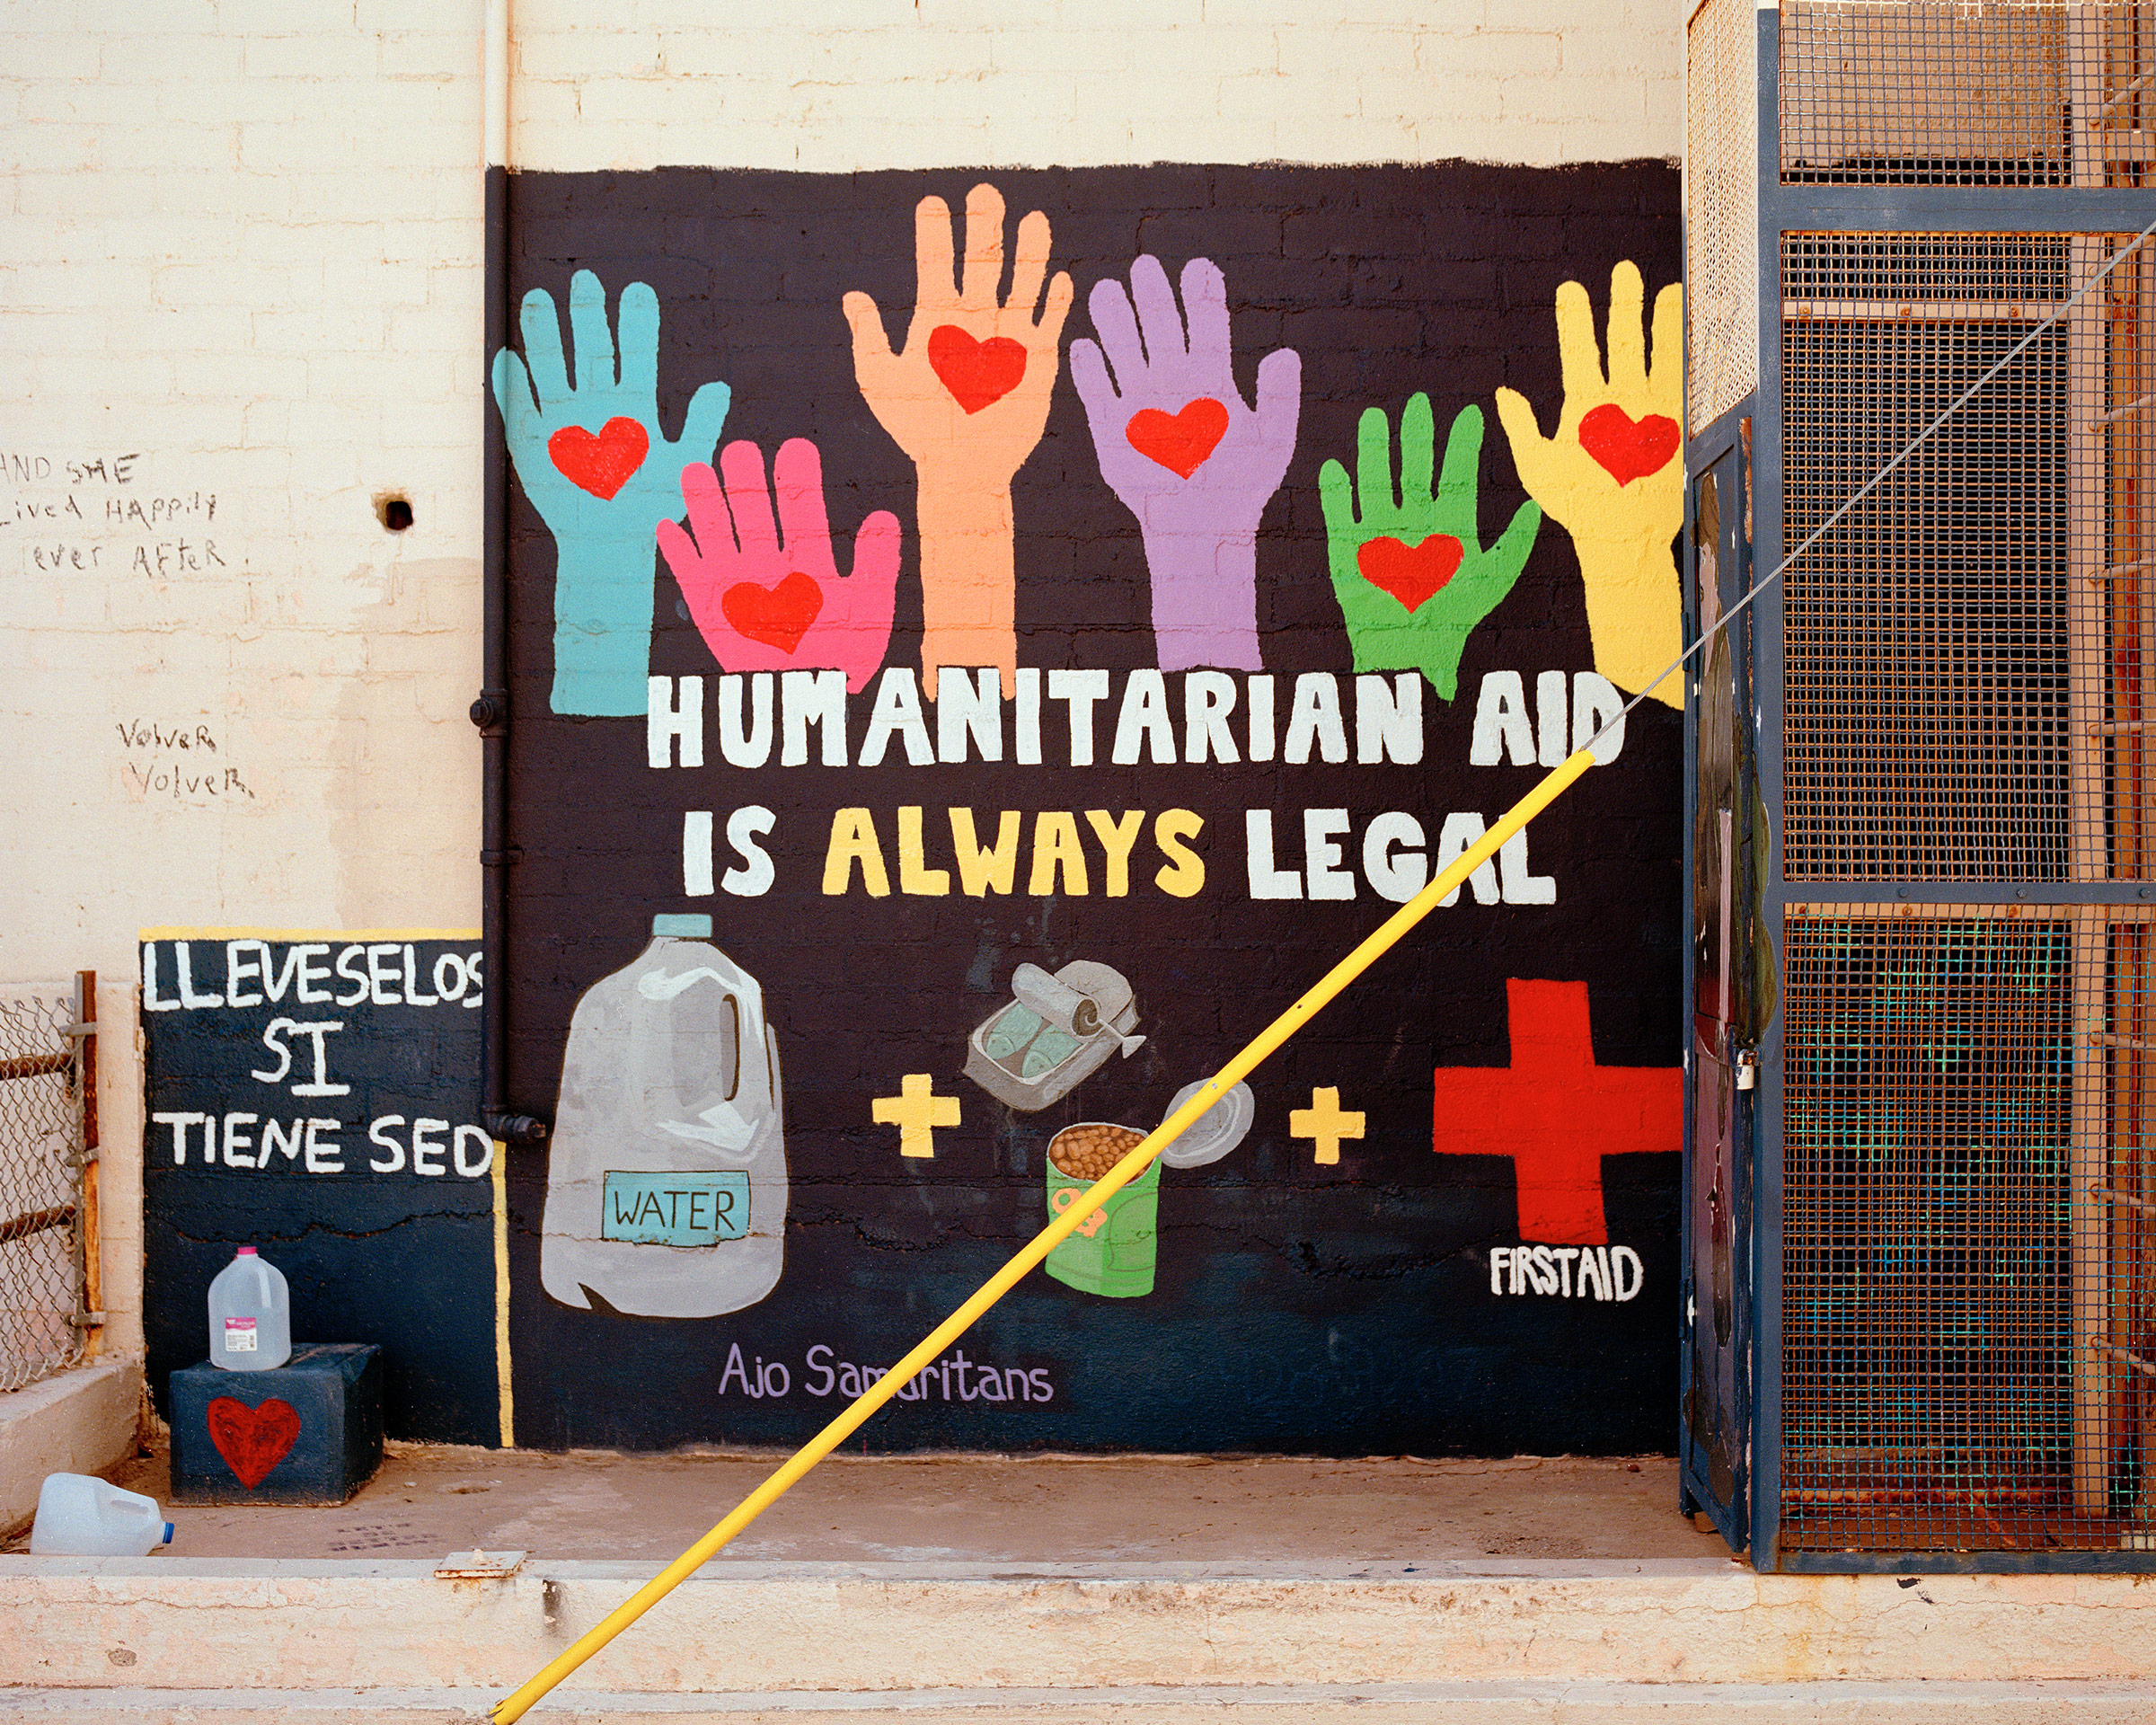 A mural in support of water and food drops is one of dozens in Ajo's "Artist Alley" that depicts support for migrants and the work of humanitarians. "Take them if you're thirsty," is painted in Spanish to the left. (Cassidy Araiza for TIME)